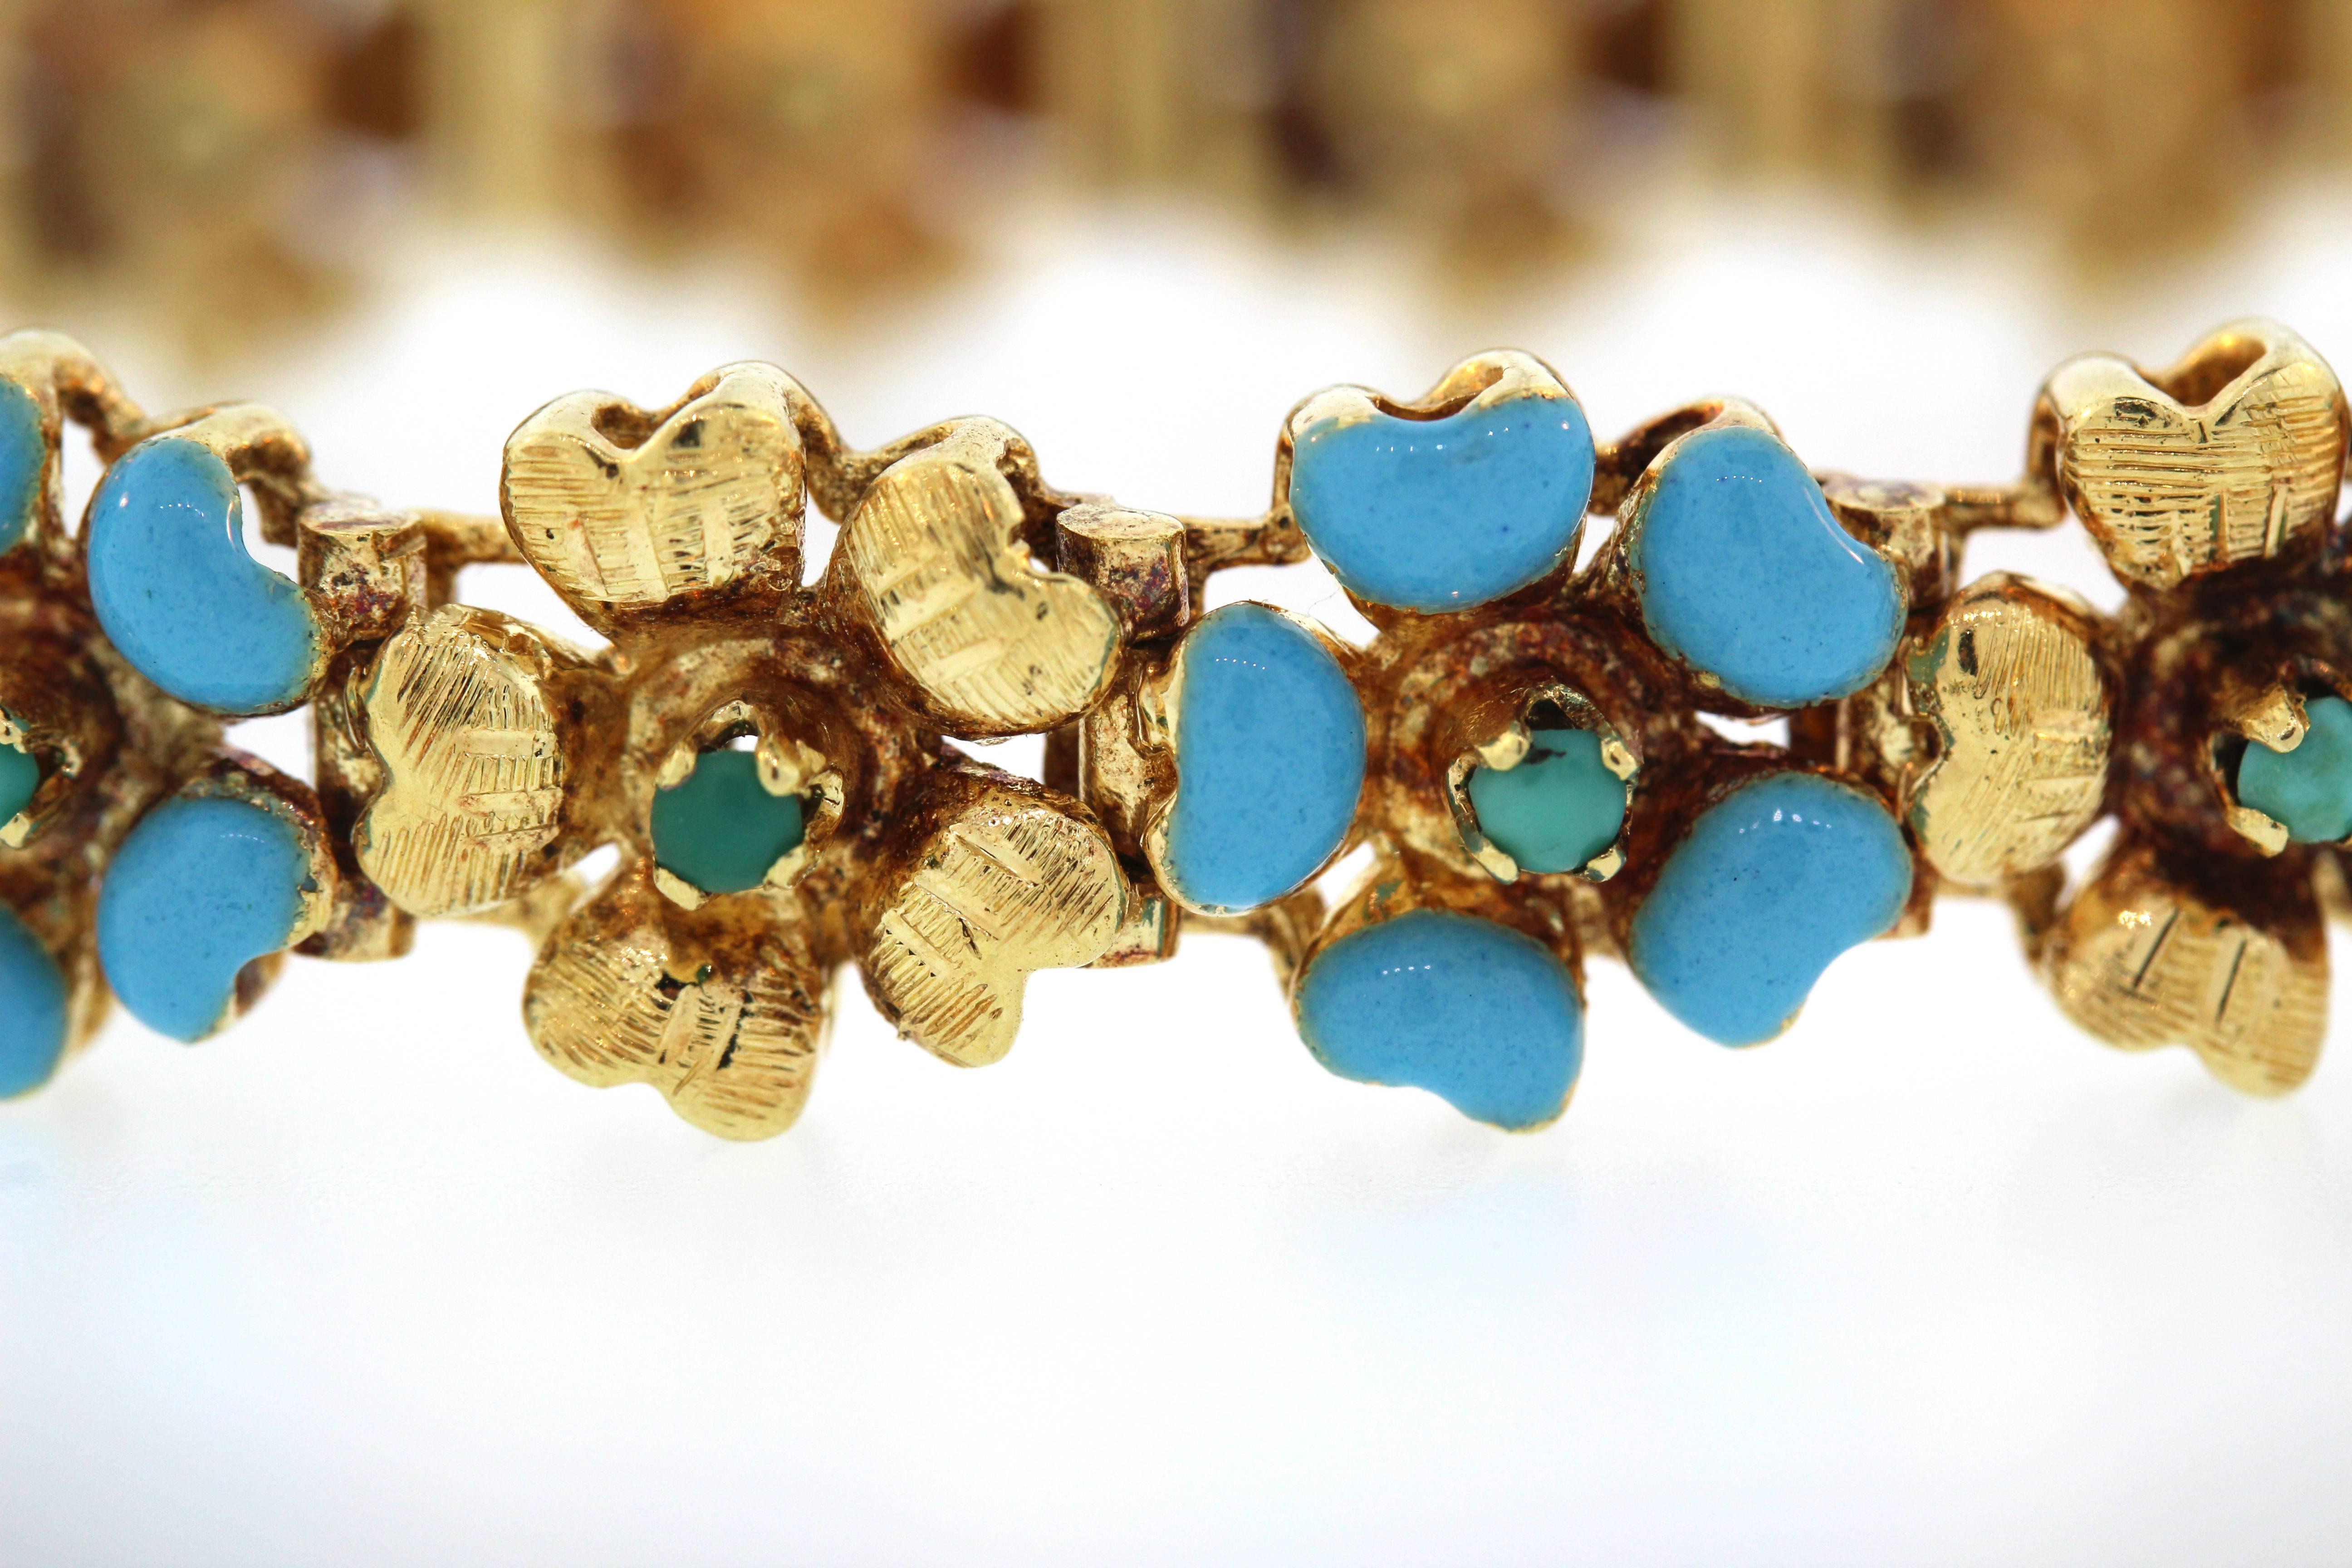 18K Yellow Gold Bracelet with Turquoise and Enamel

Flower leaves are done in Blue Enamel. Flower centers are turquoise.

Bracelet is made in Italy by 